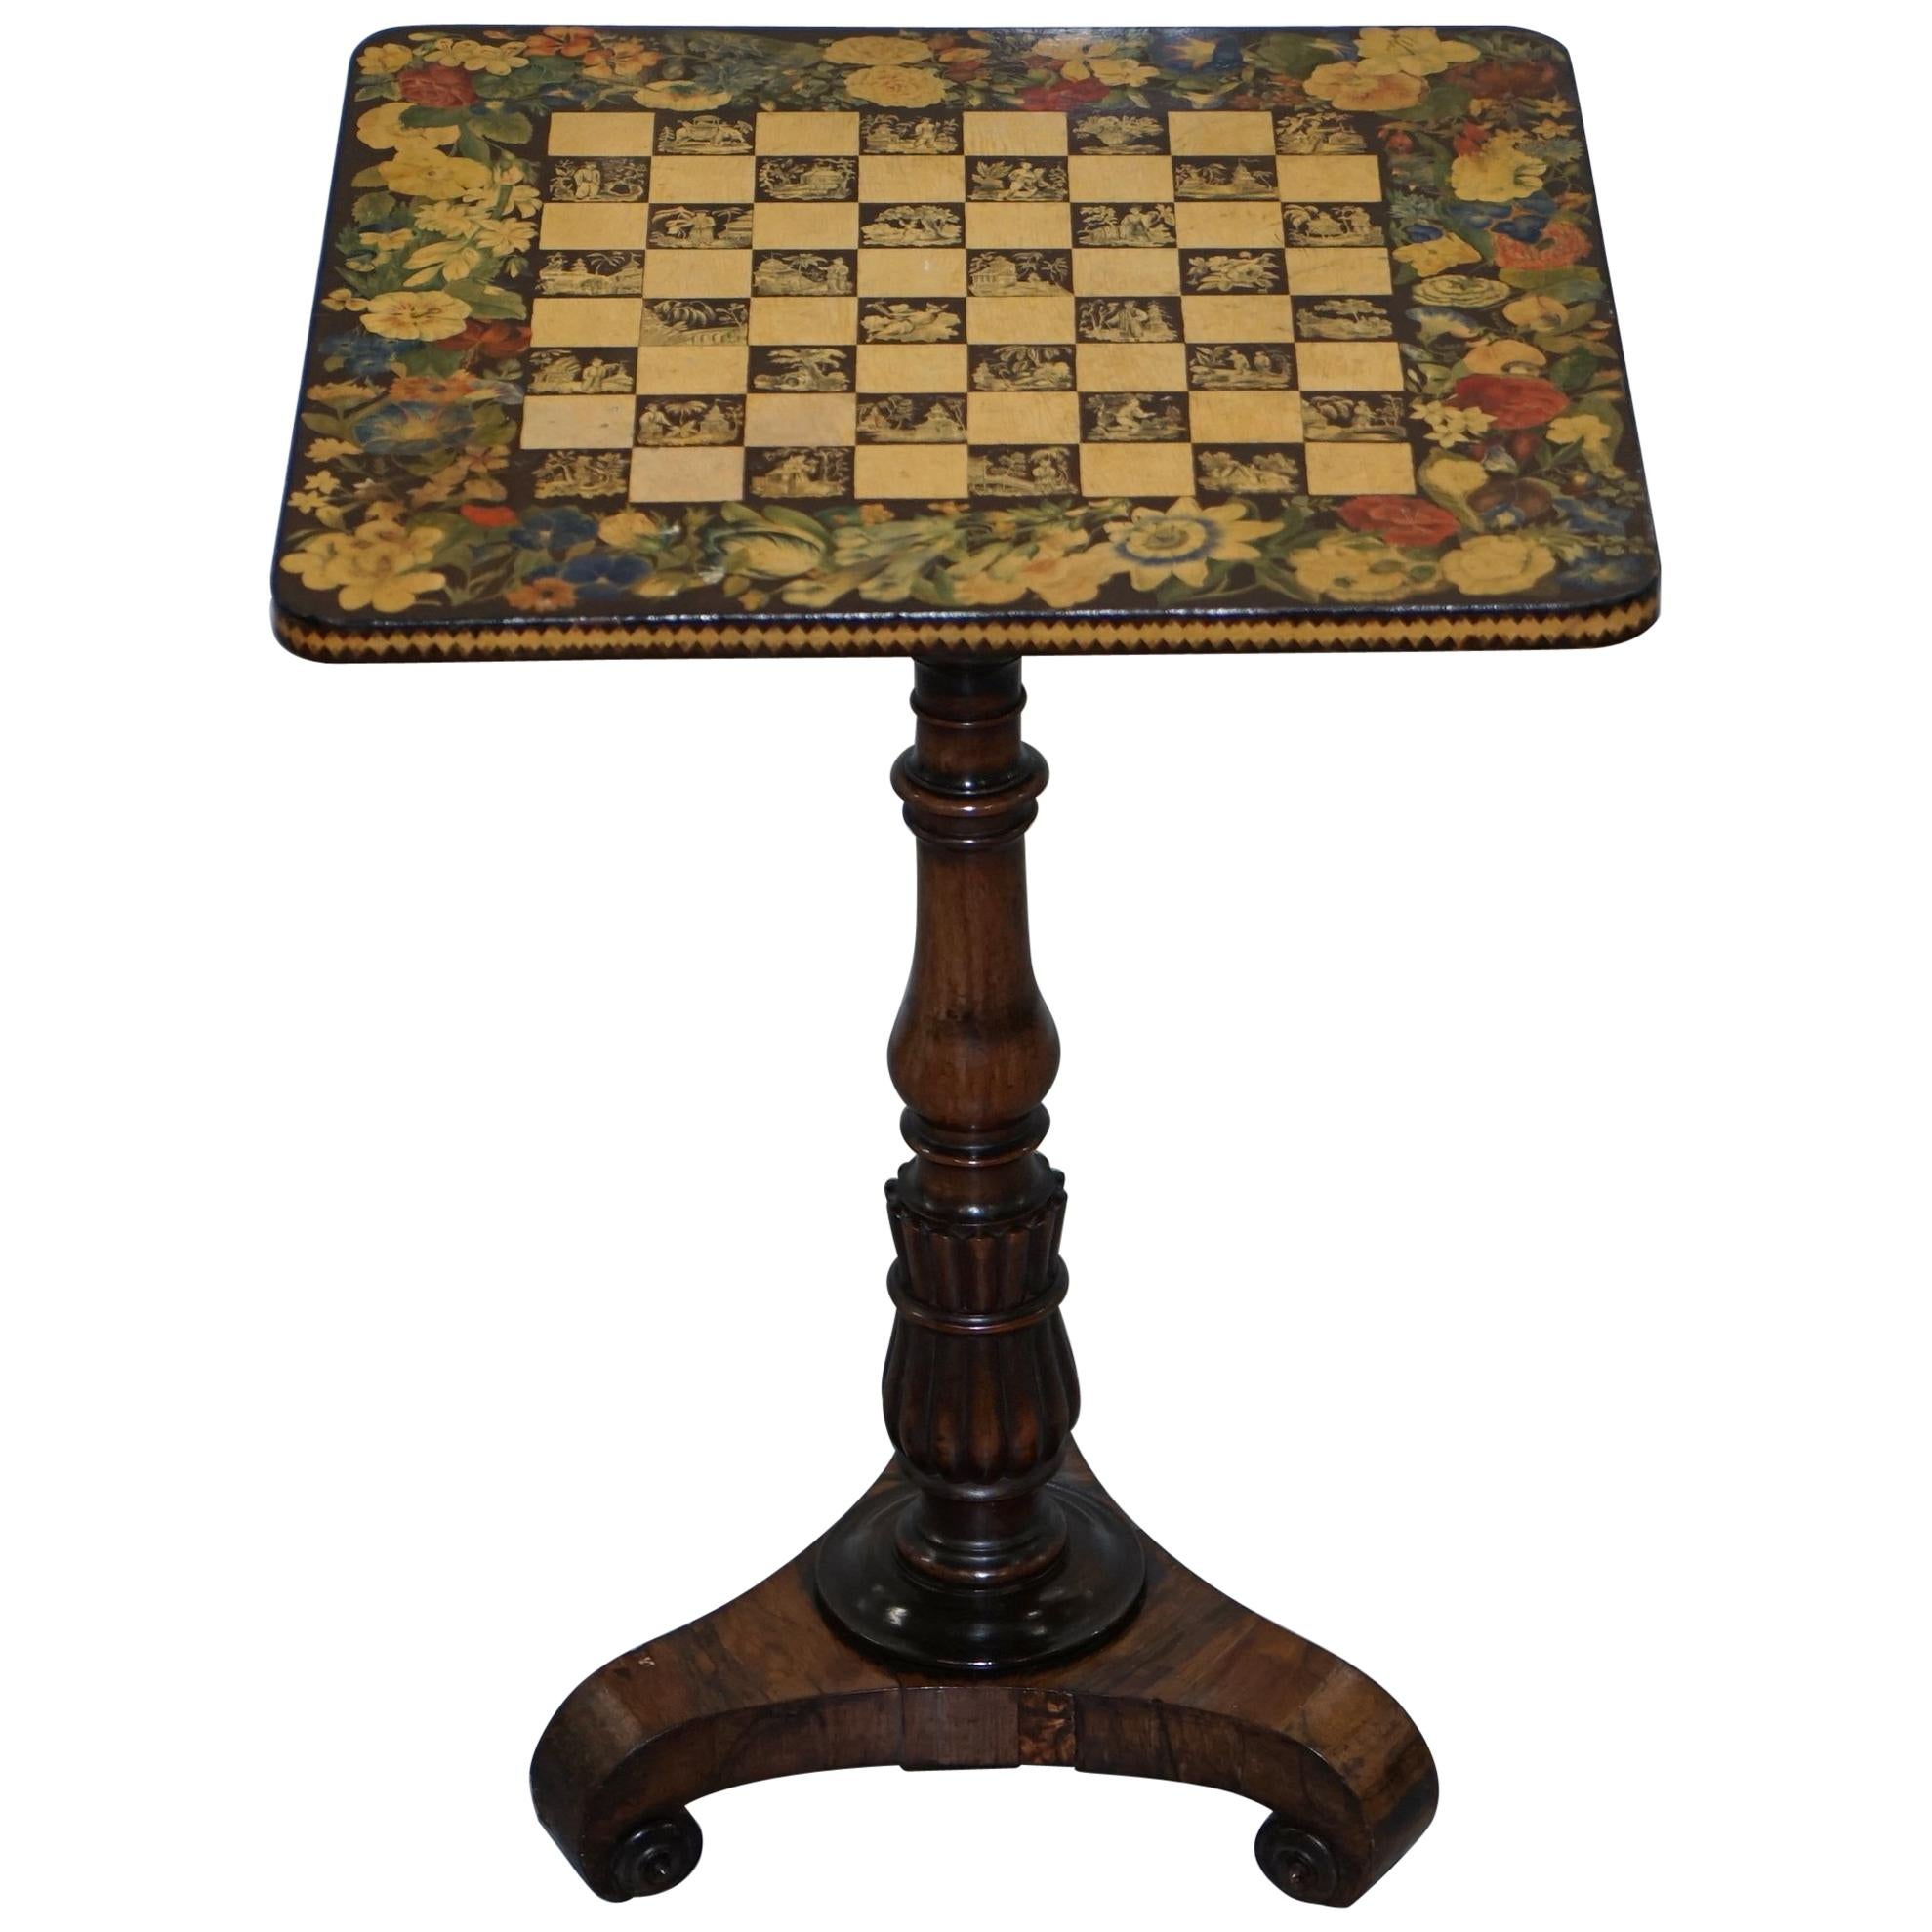 Chinese Chinoiserie George IV Rare Wood Games Table Chess Tilt Top, circa 1820